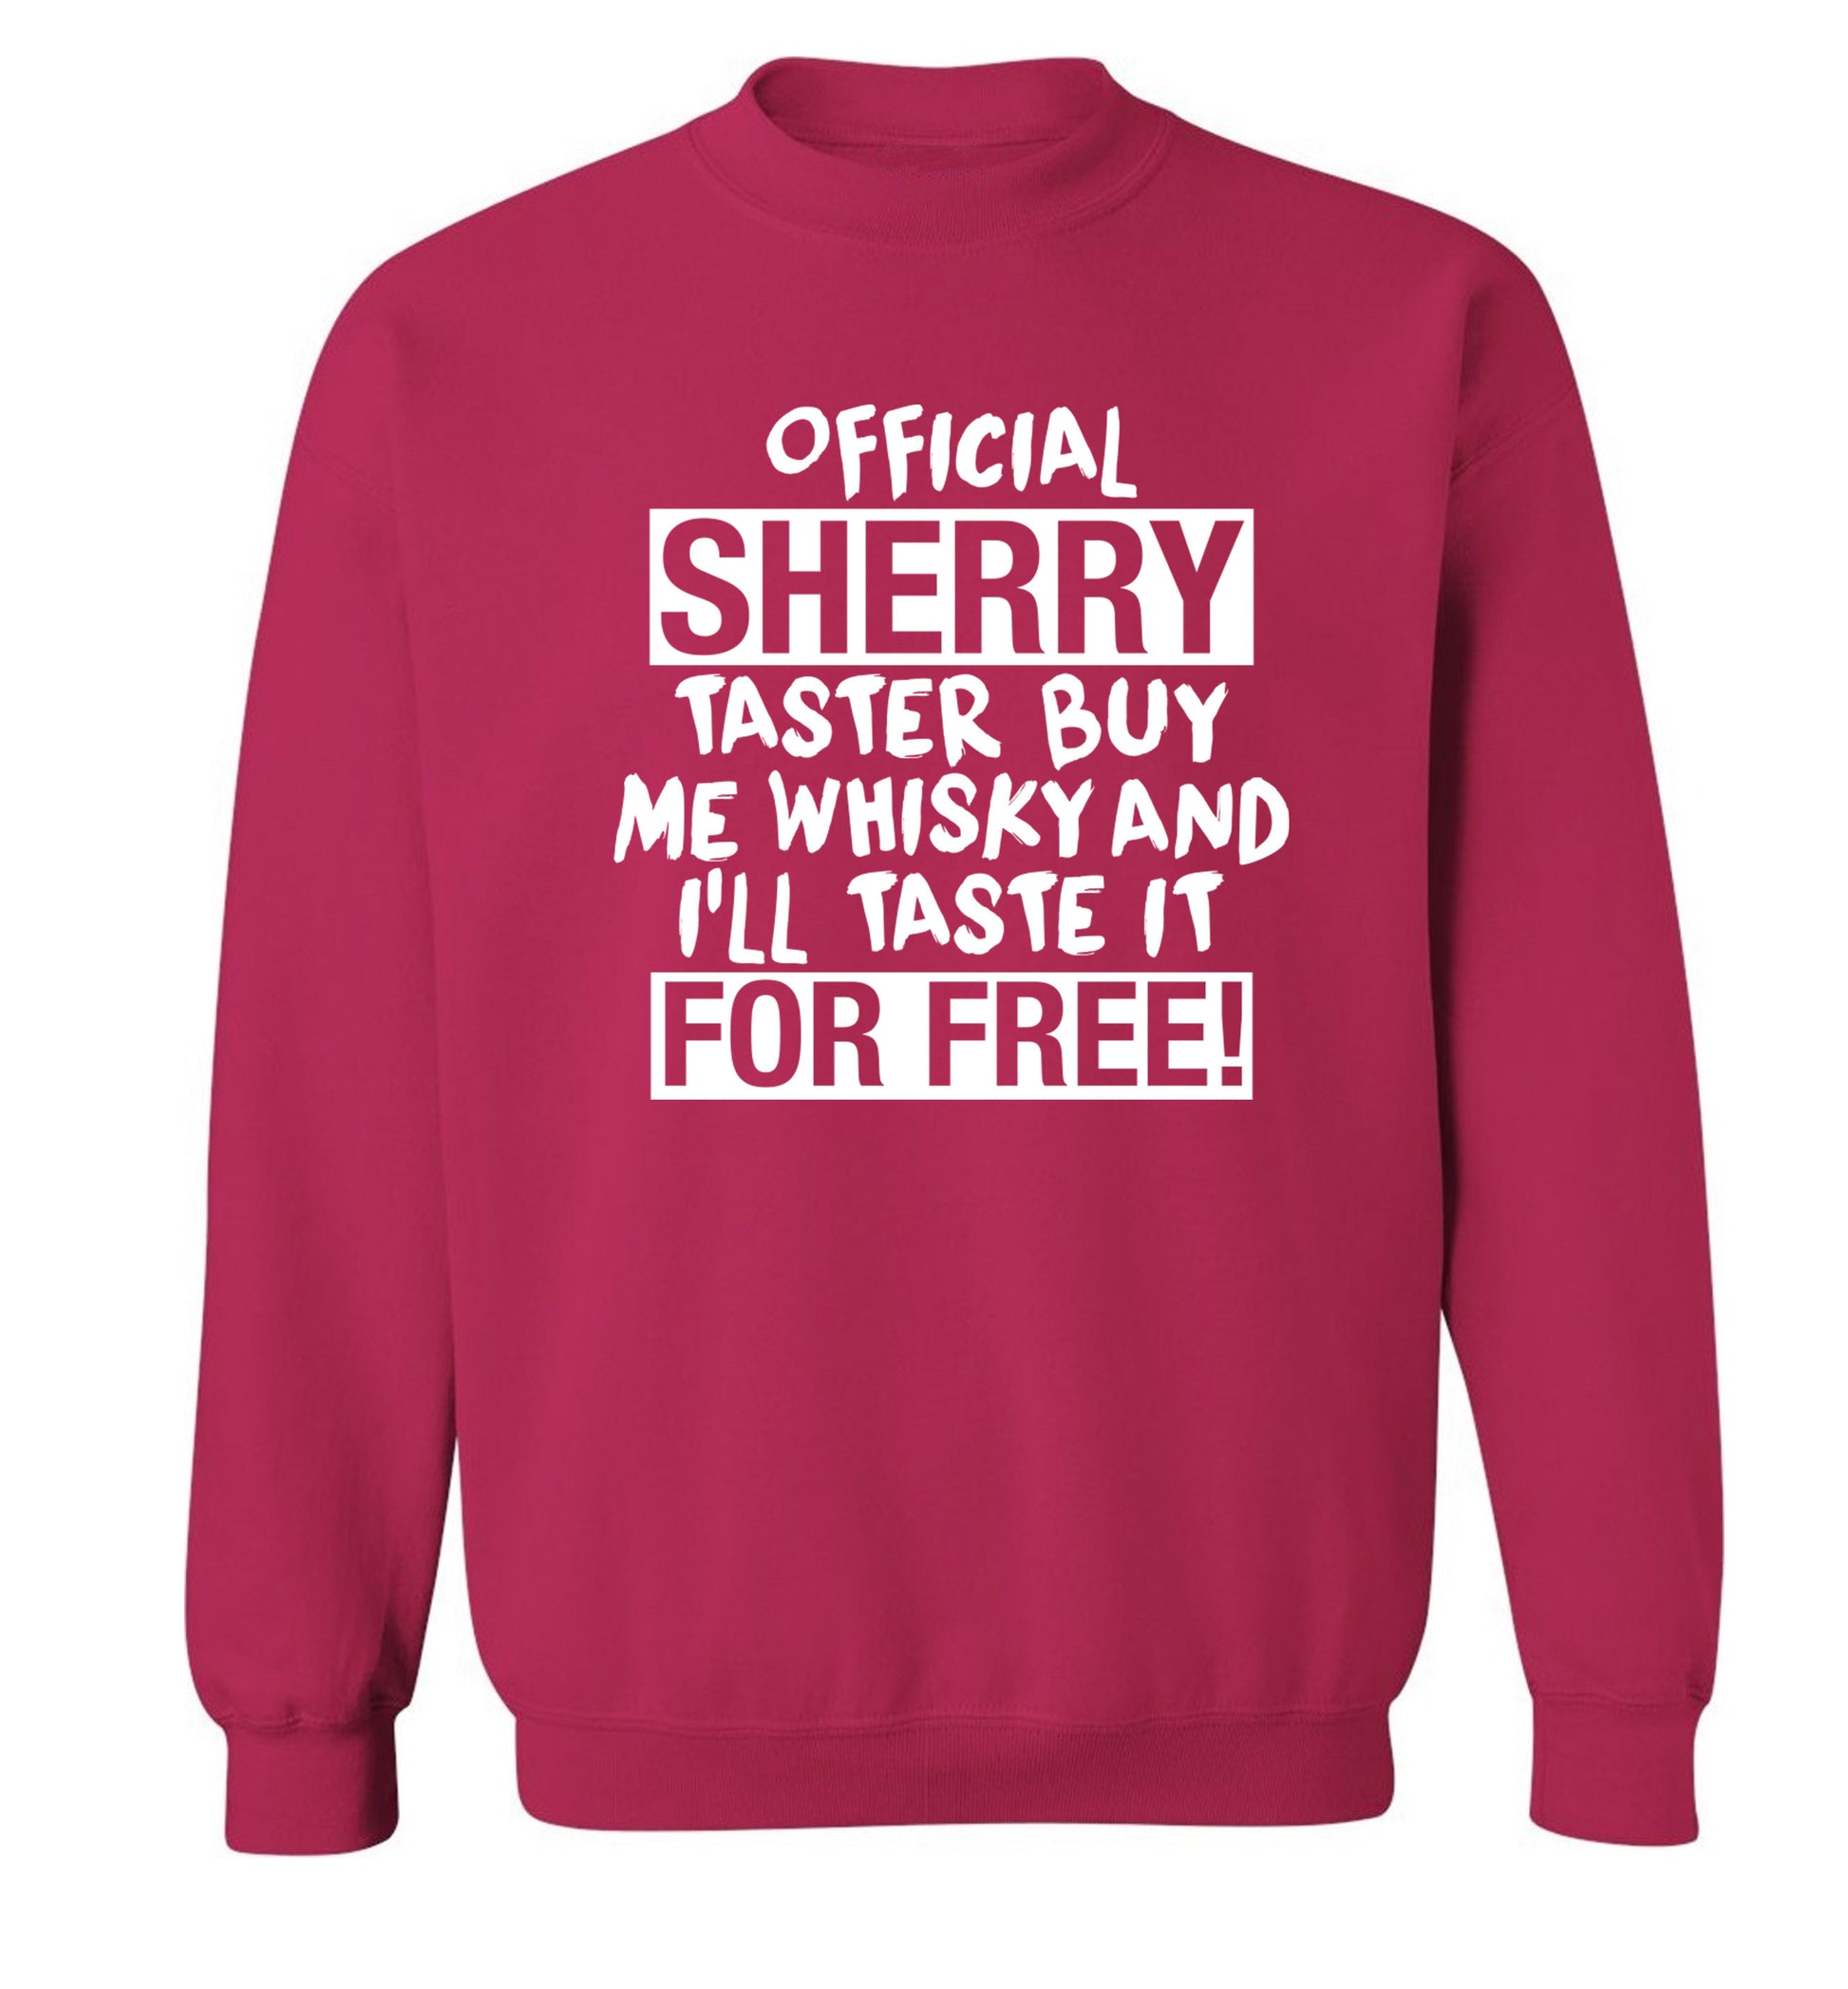 Official sherry taster buy me sherry and I'll taste it for free Adult's unisex pink Sweater 2XL